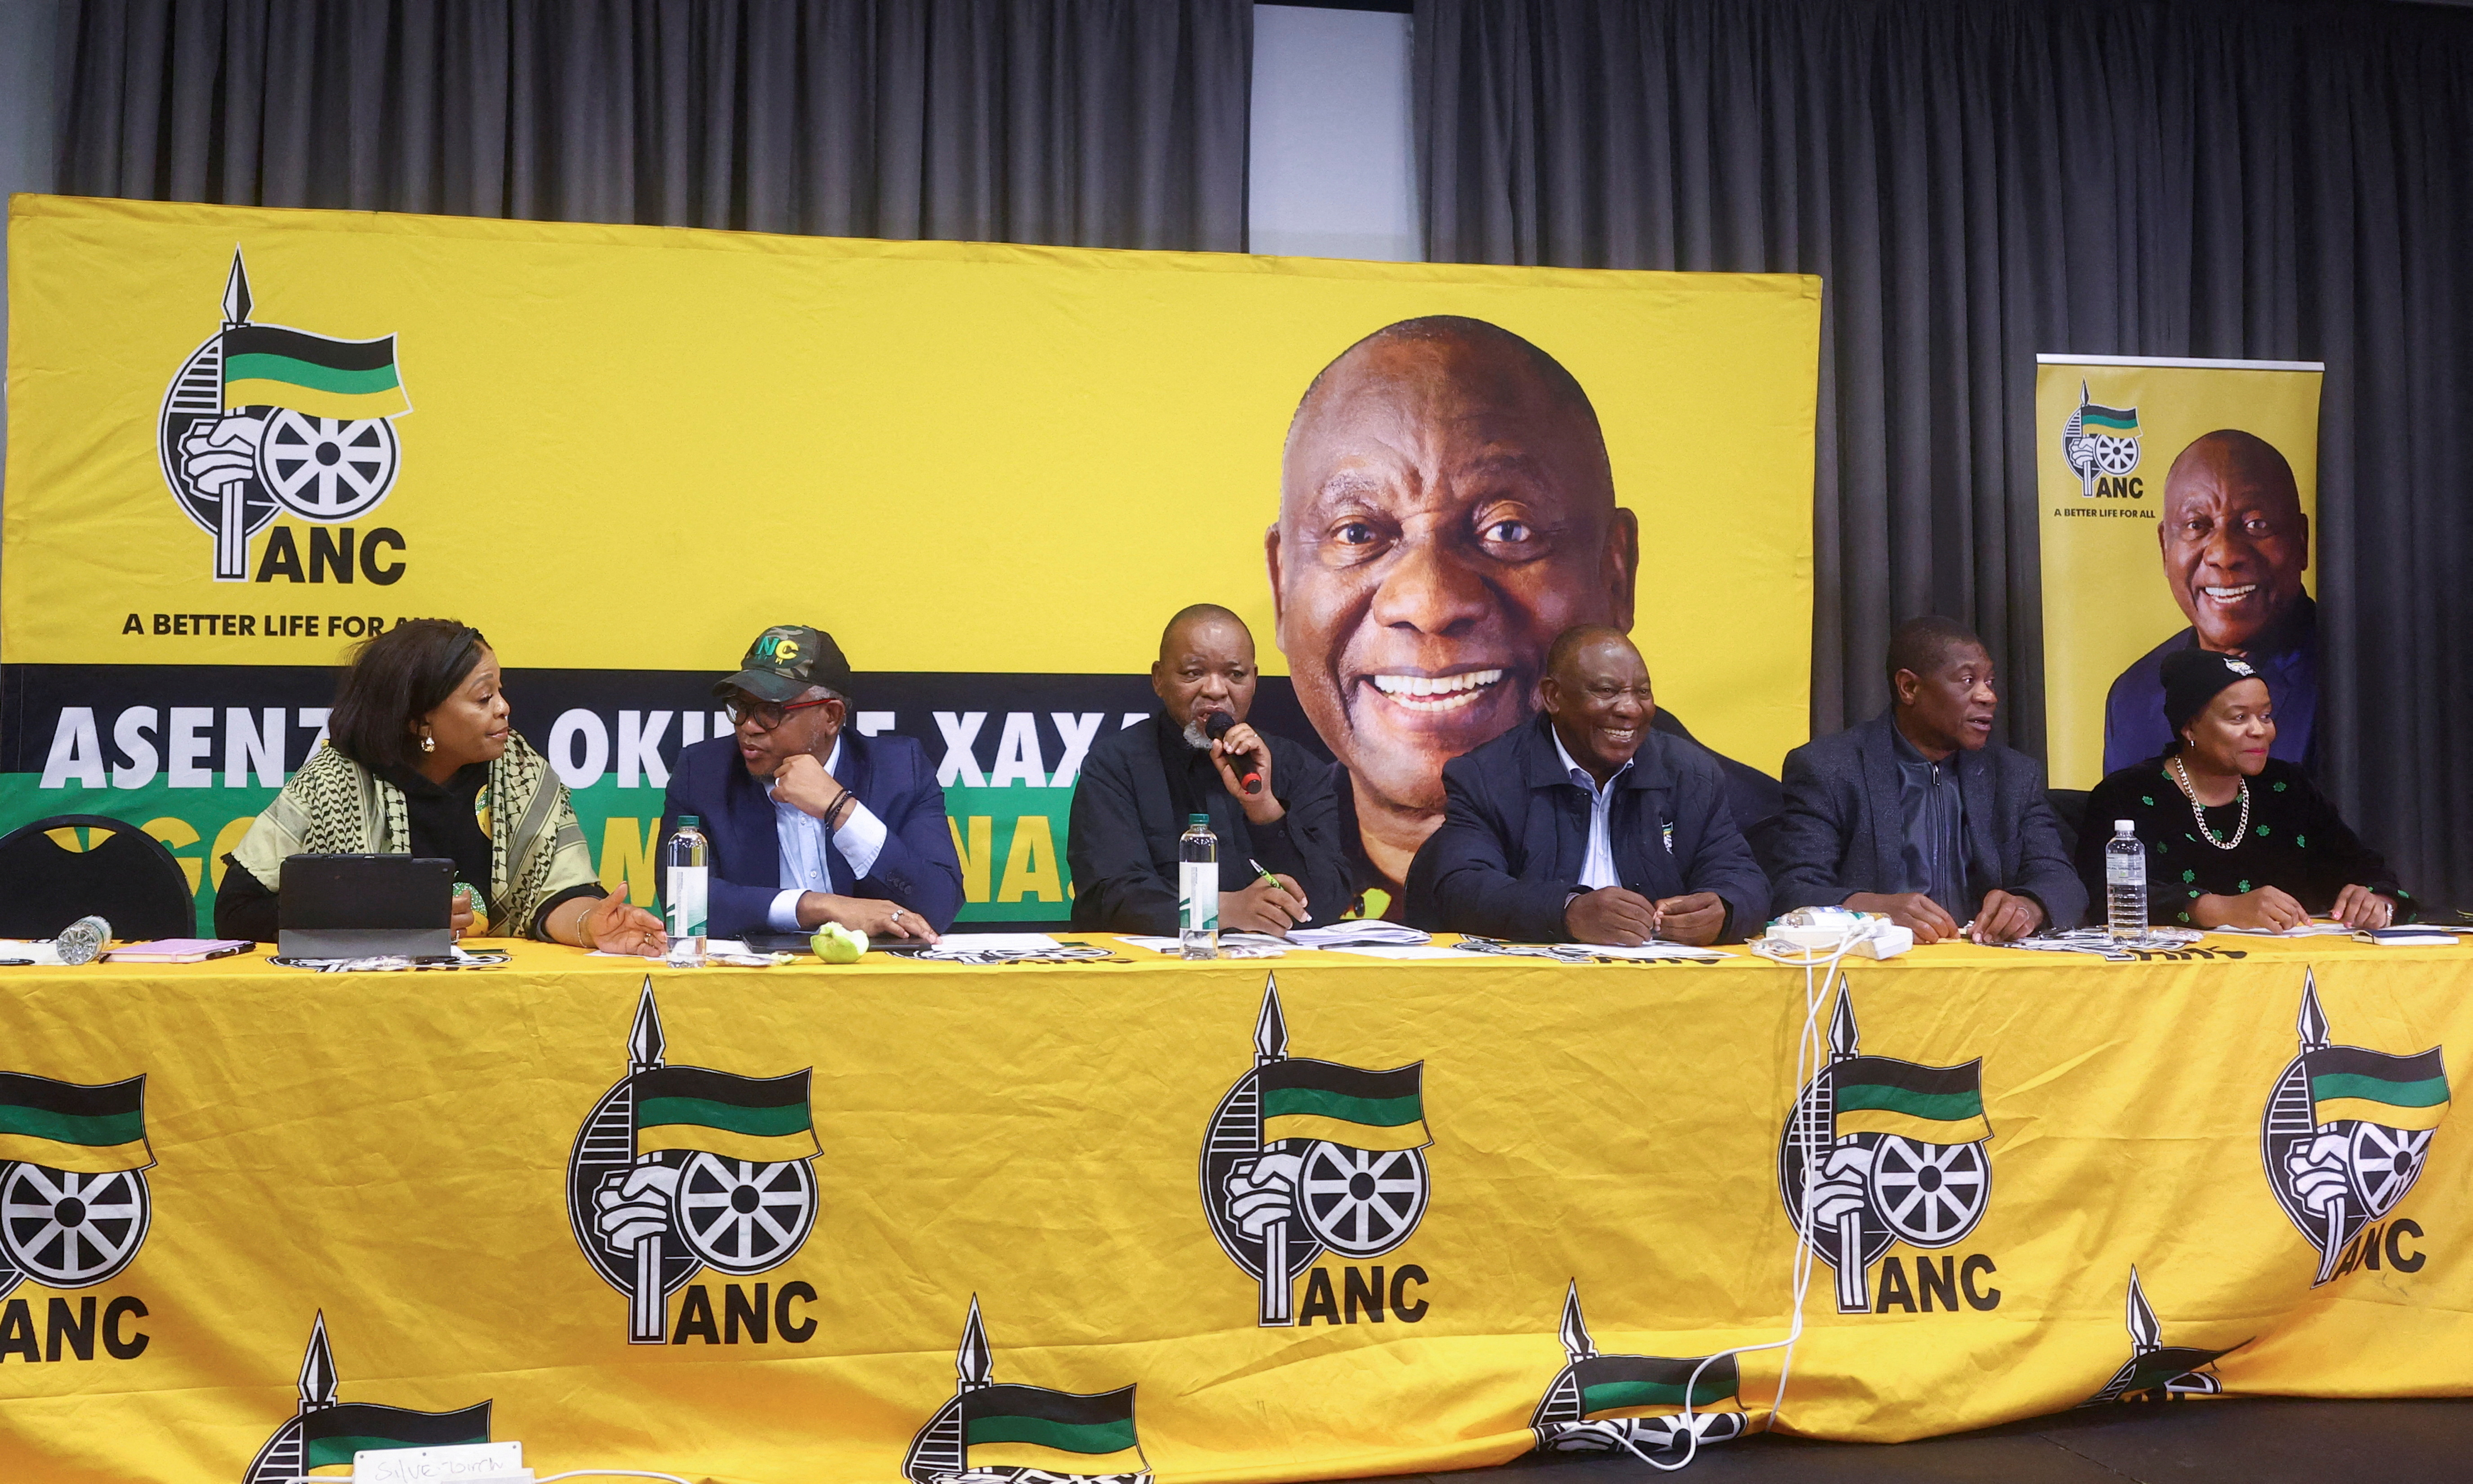 South Africa's ANC says it is looking at all options to form government